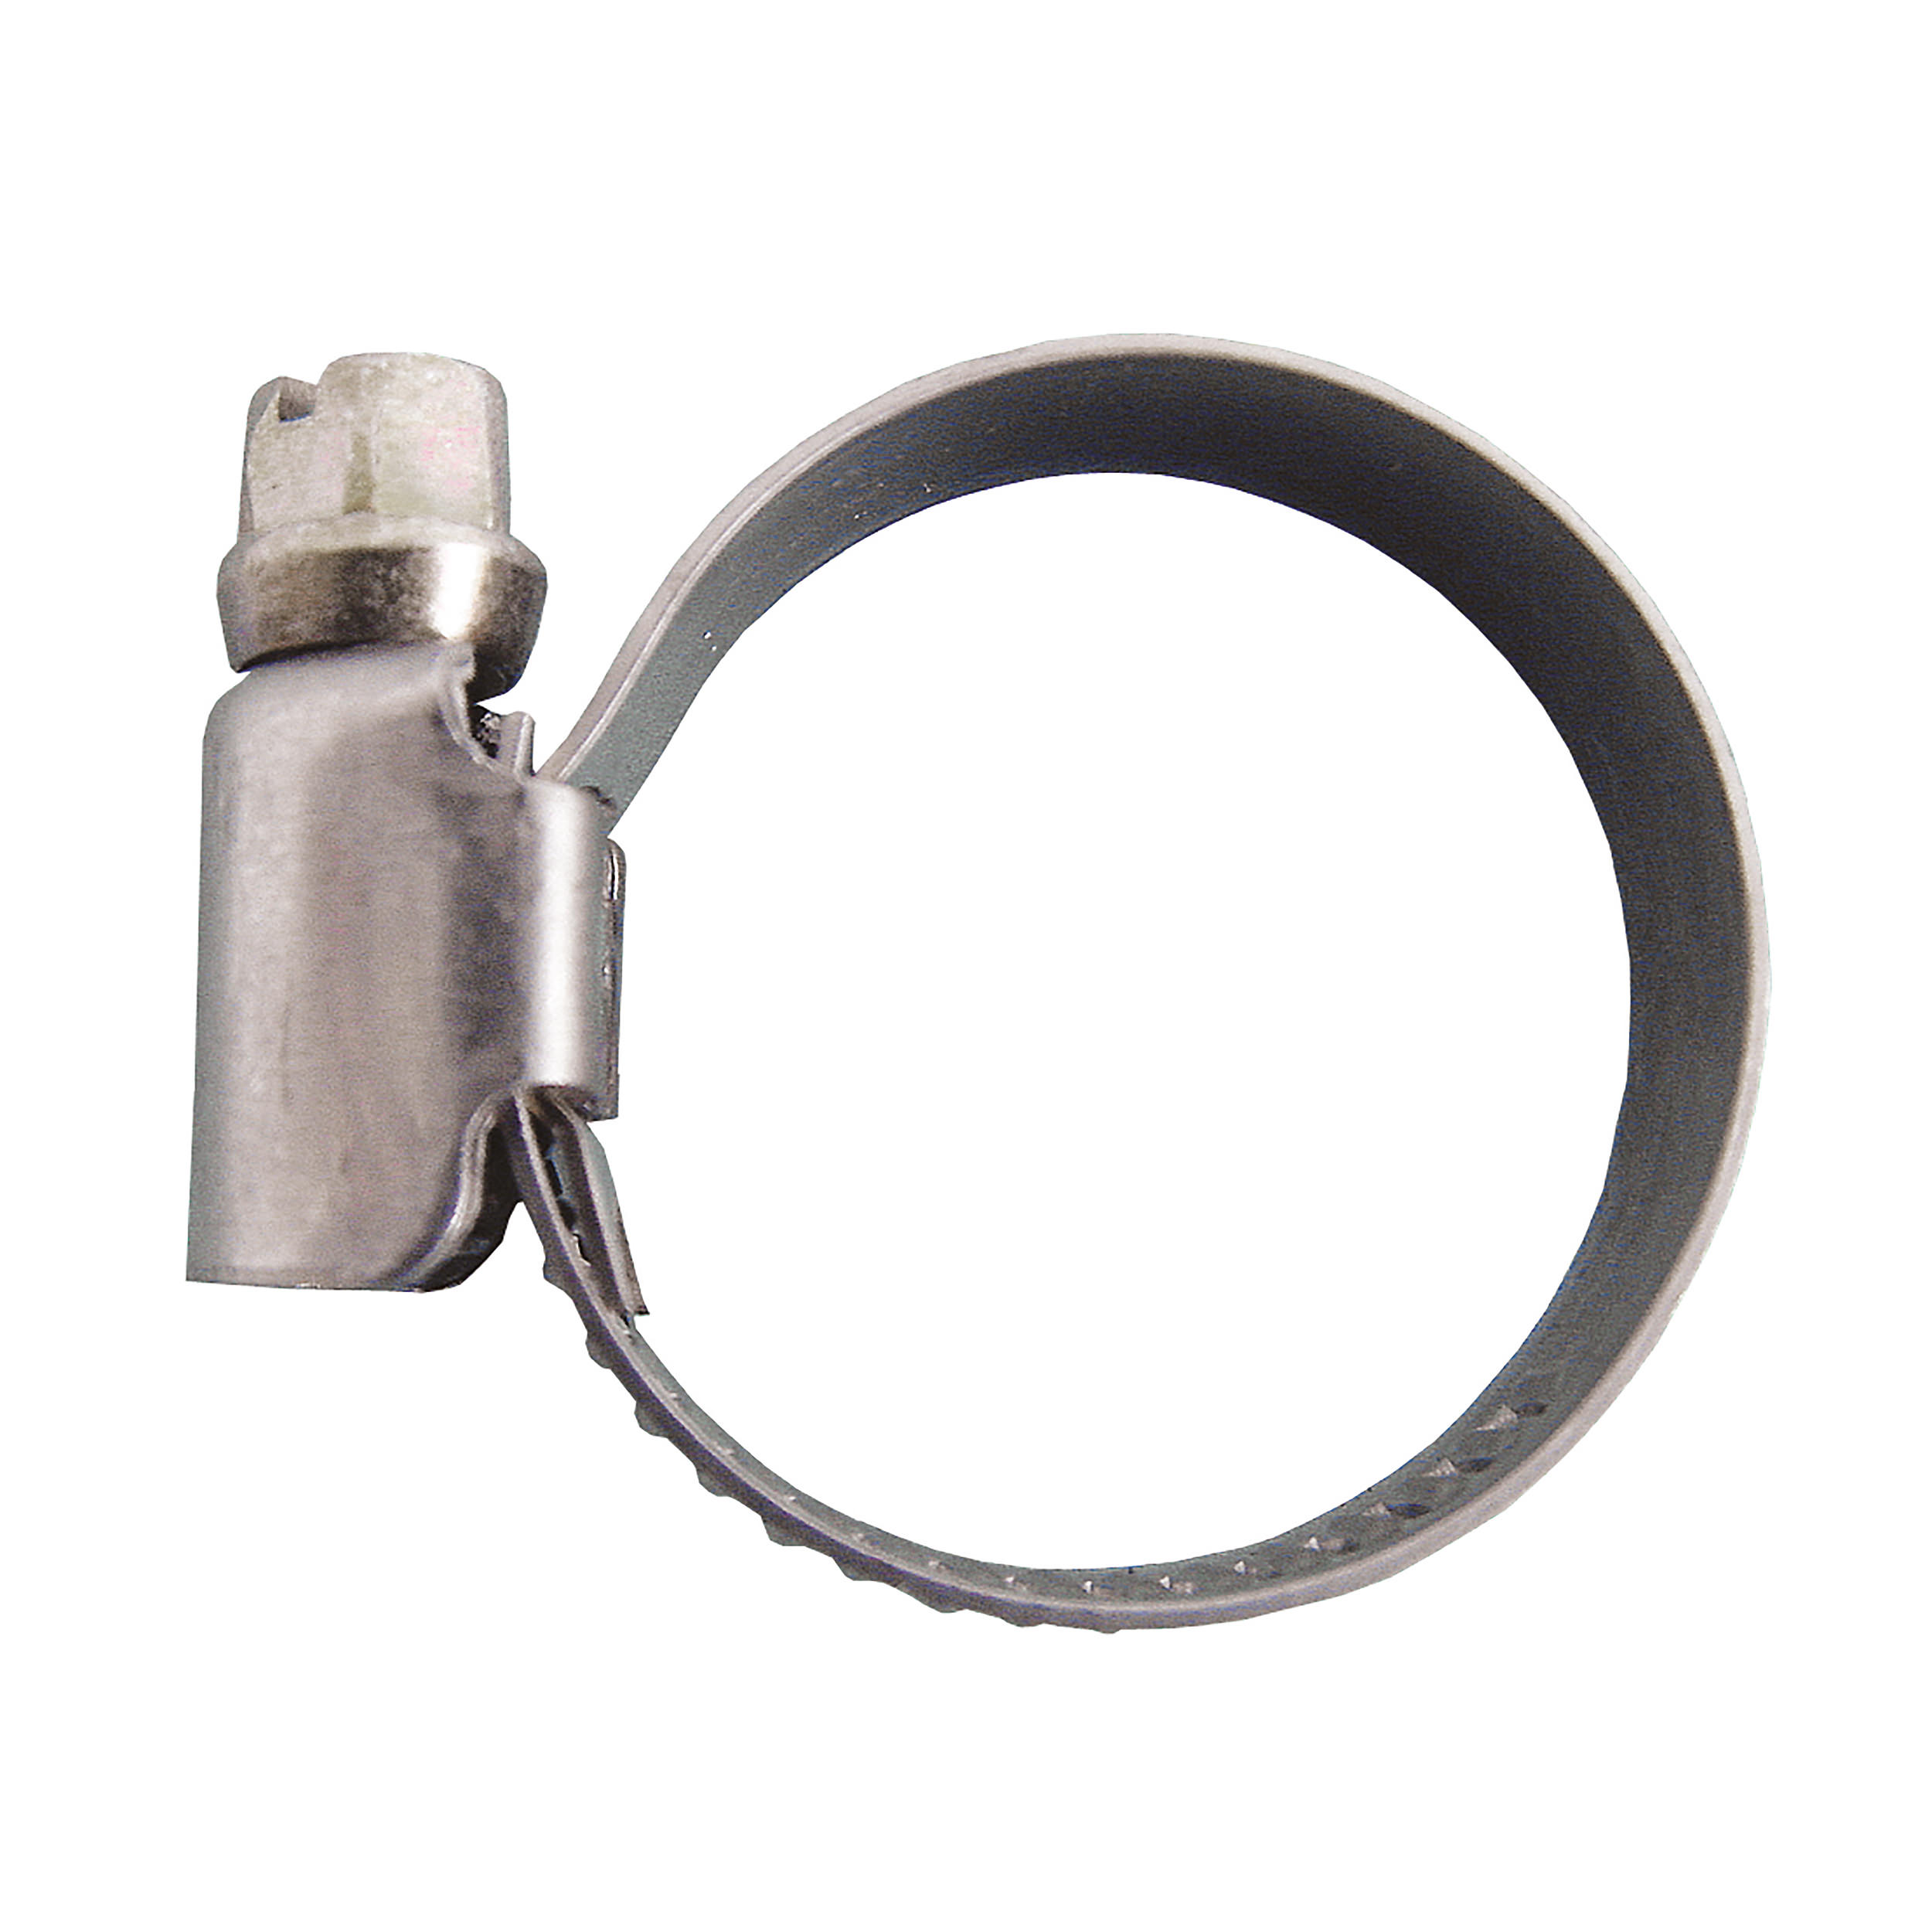 Hose clamp w. worm drive, strip/housing made of stainless steel